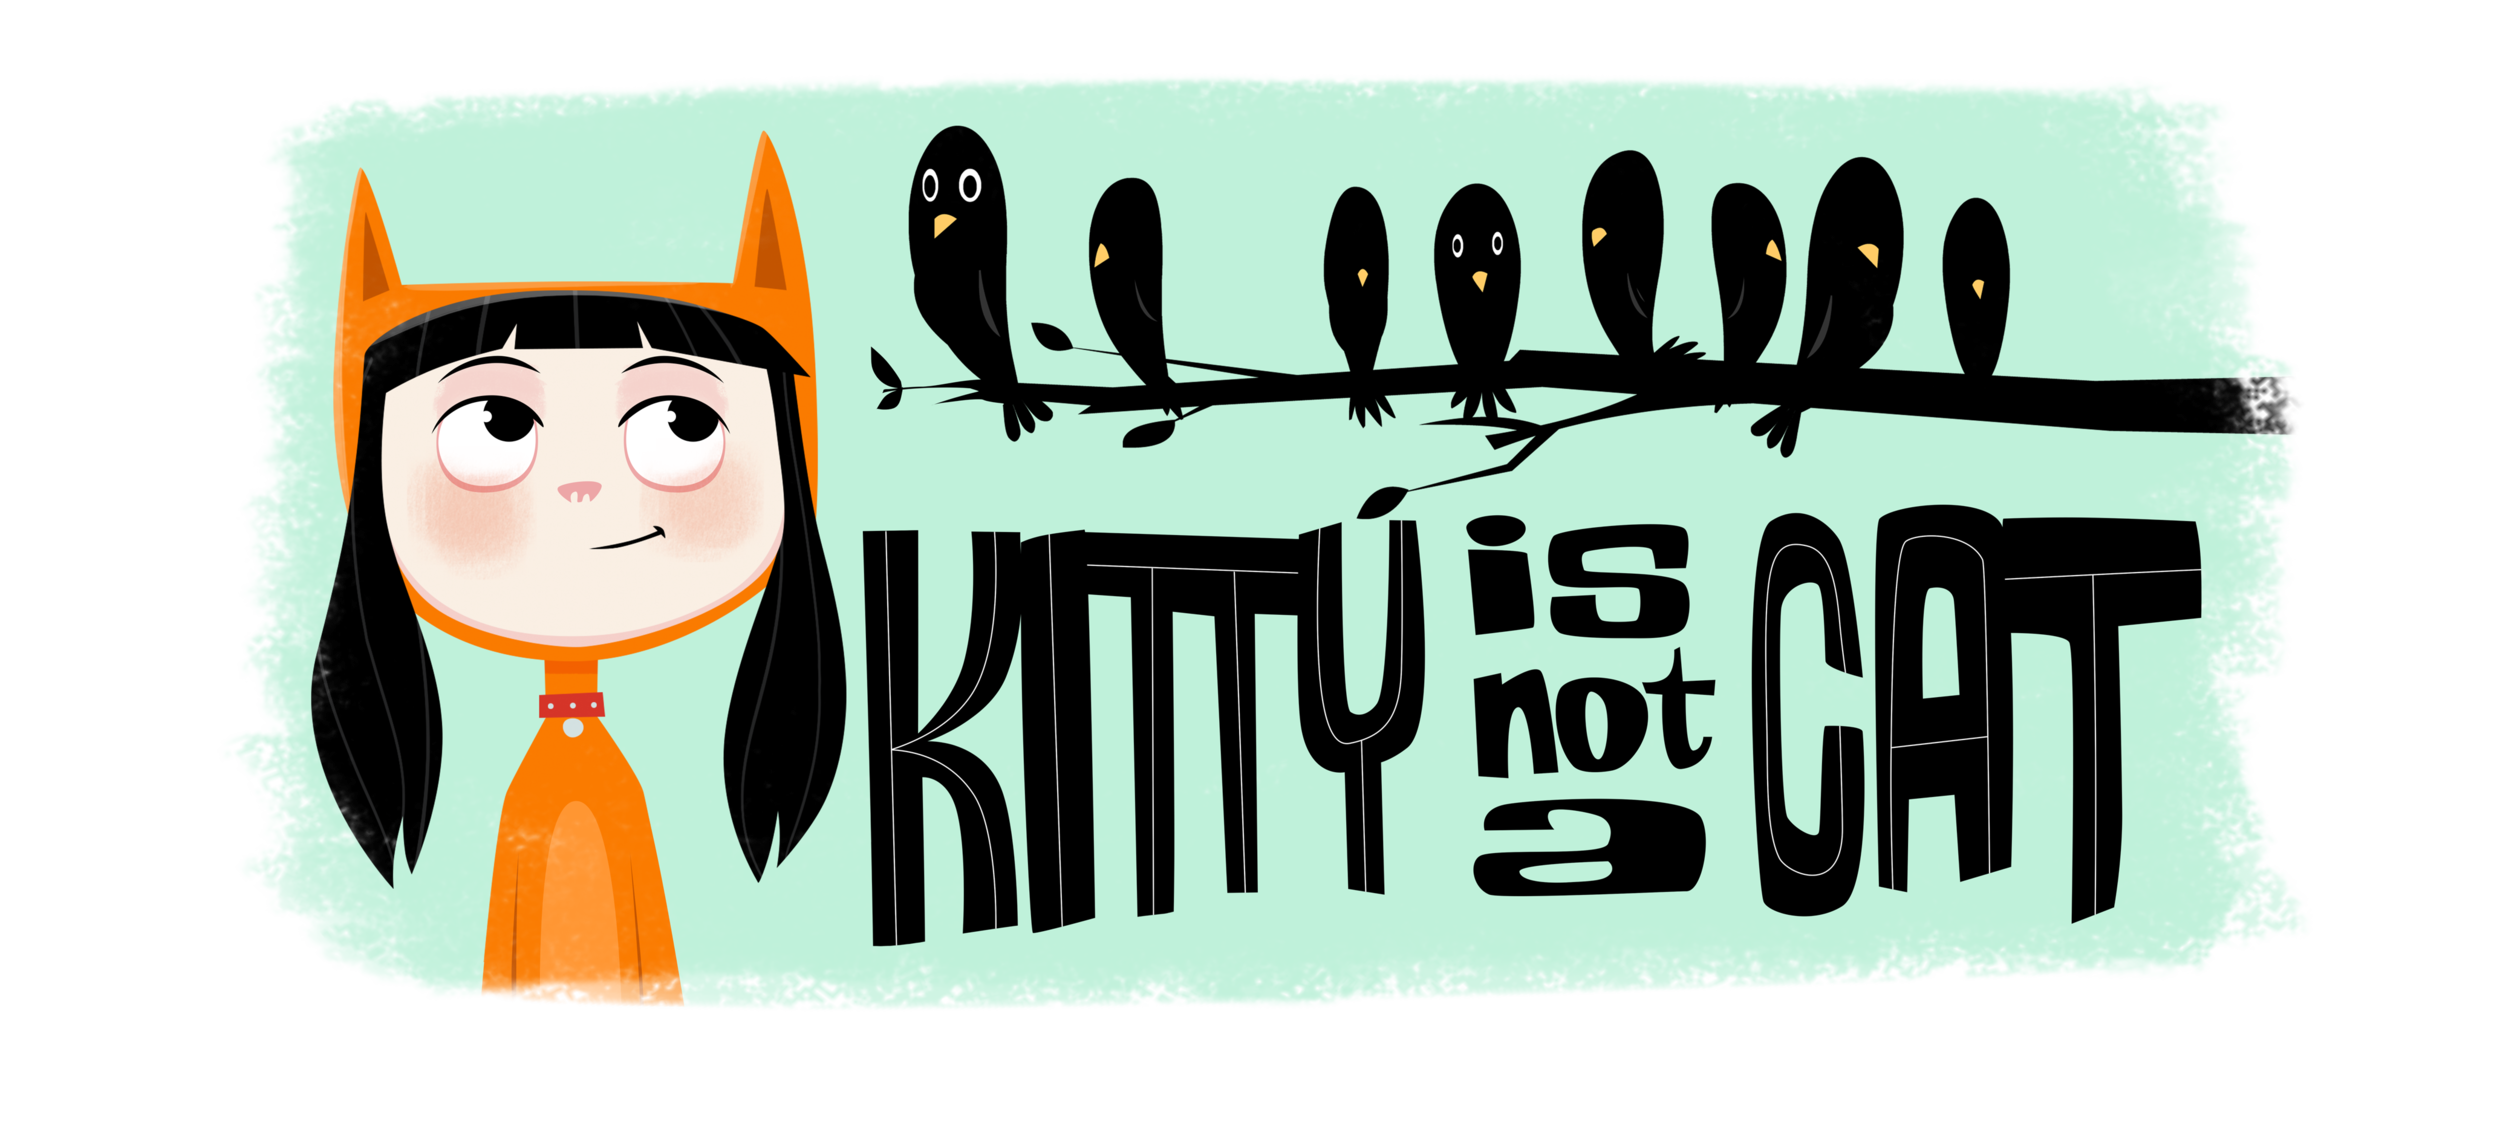 Kitty Is Not a Cat